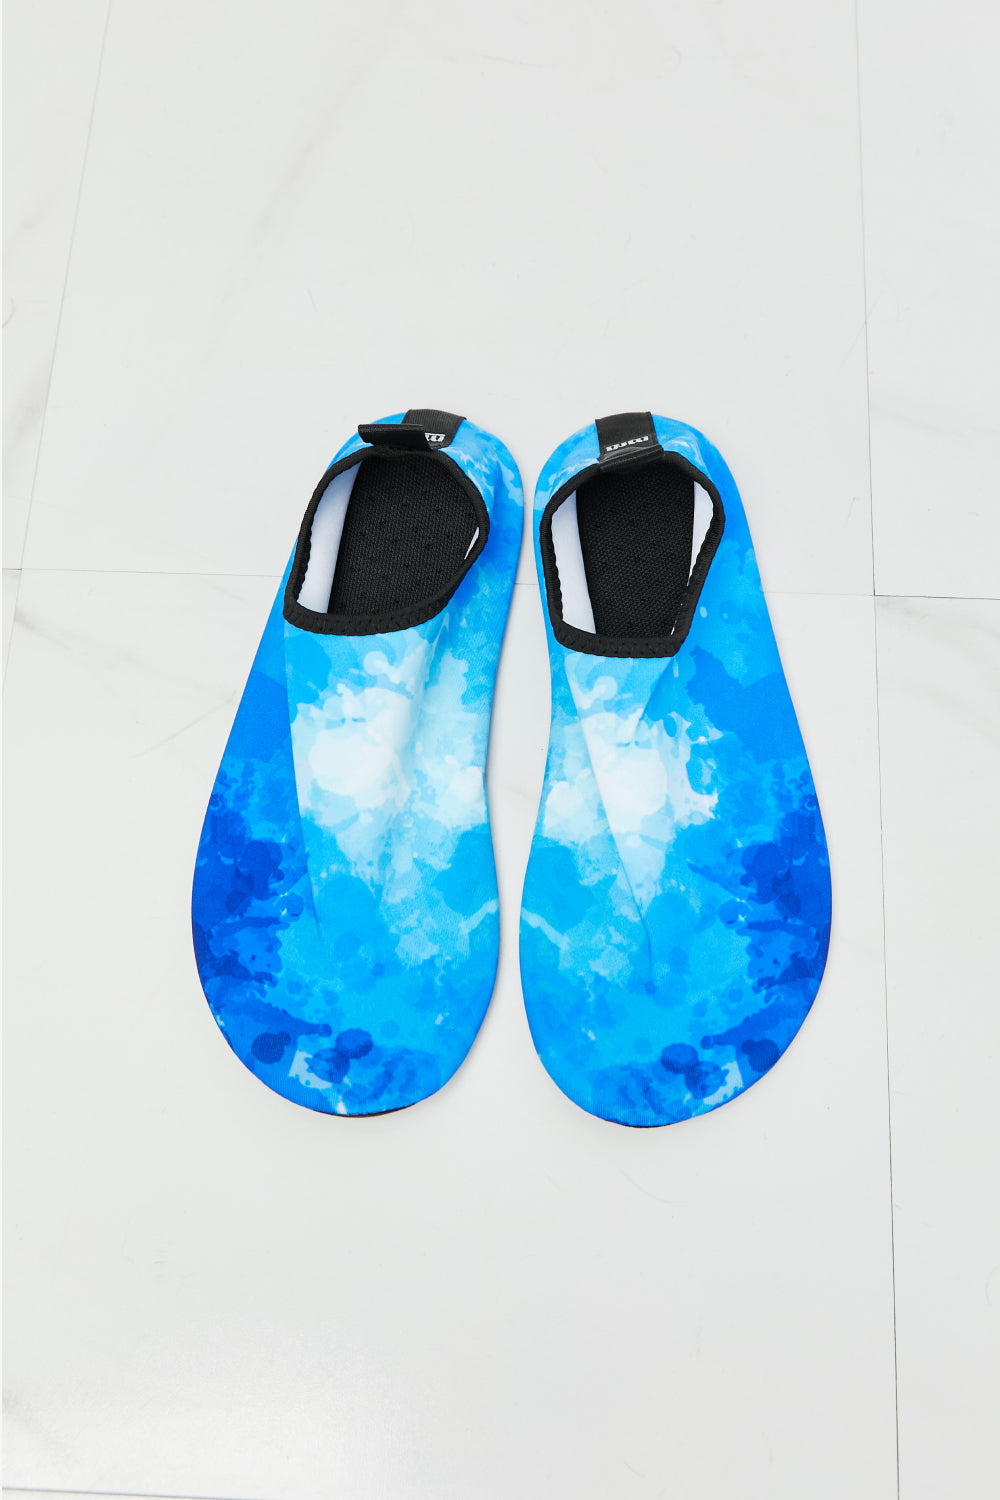 MMshoes On The Shore Water Shoes in Blue Print on any thing USA/STOD clothes